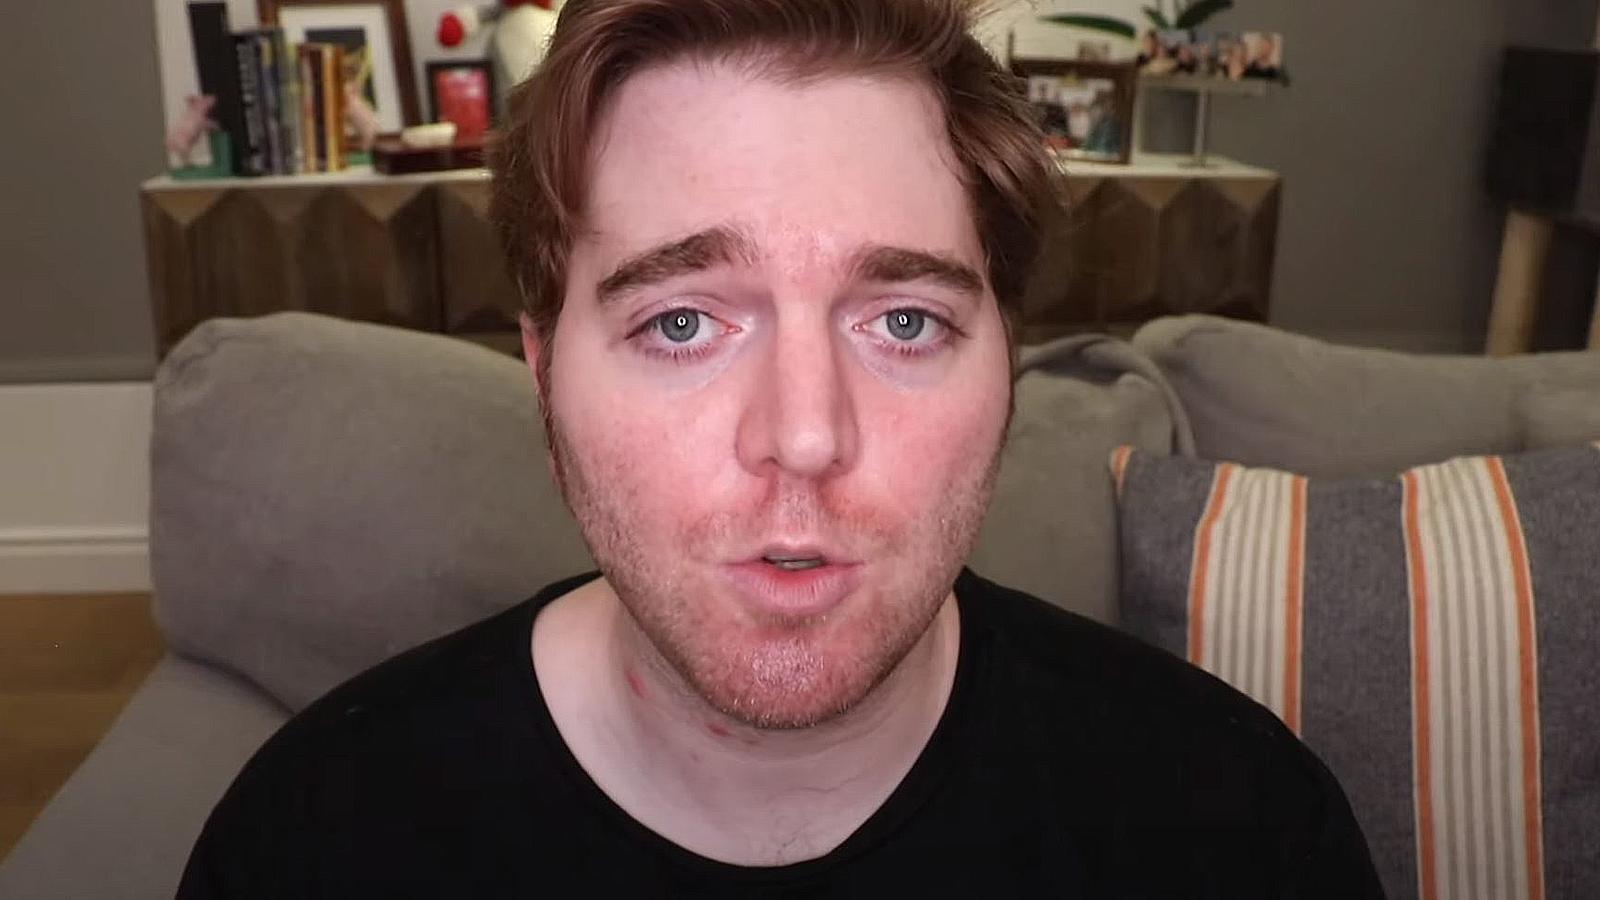 Shane Dawson speaks to the camera during his apology video.